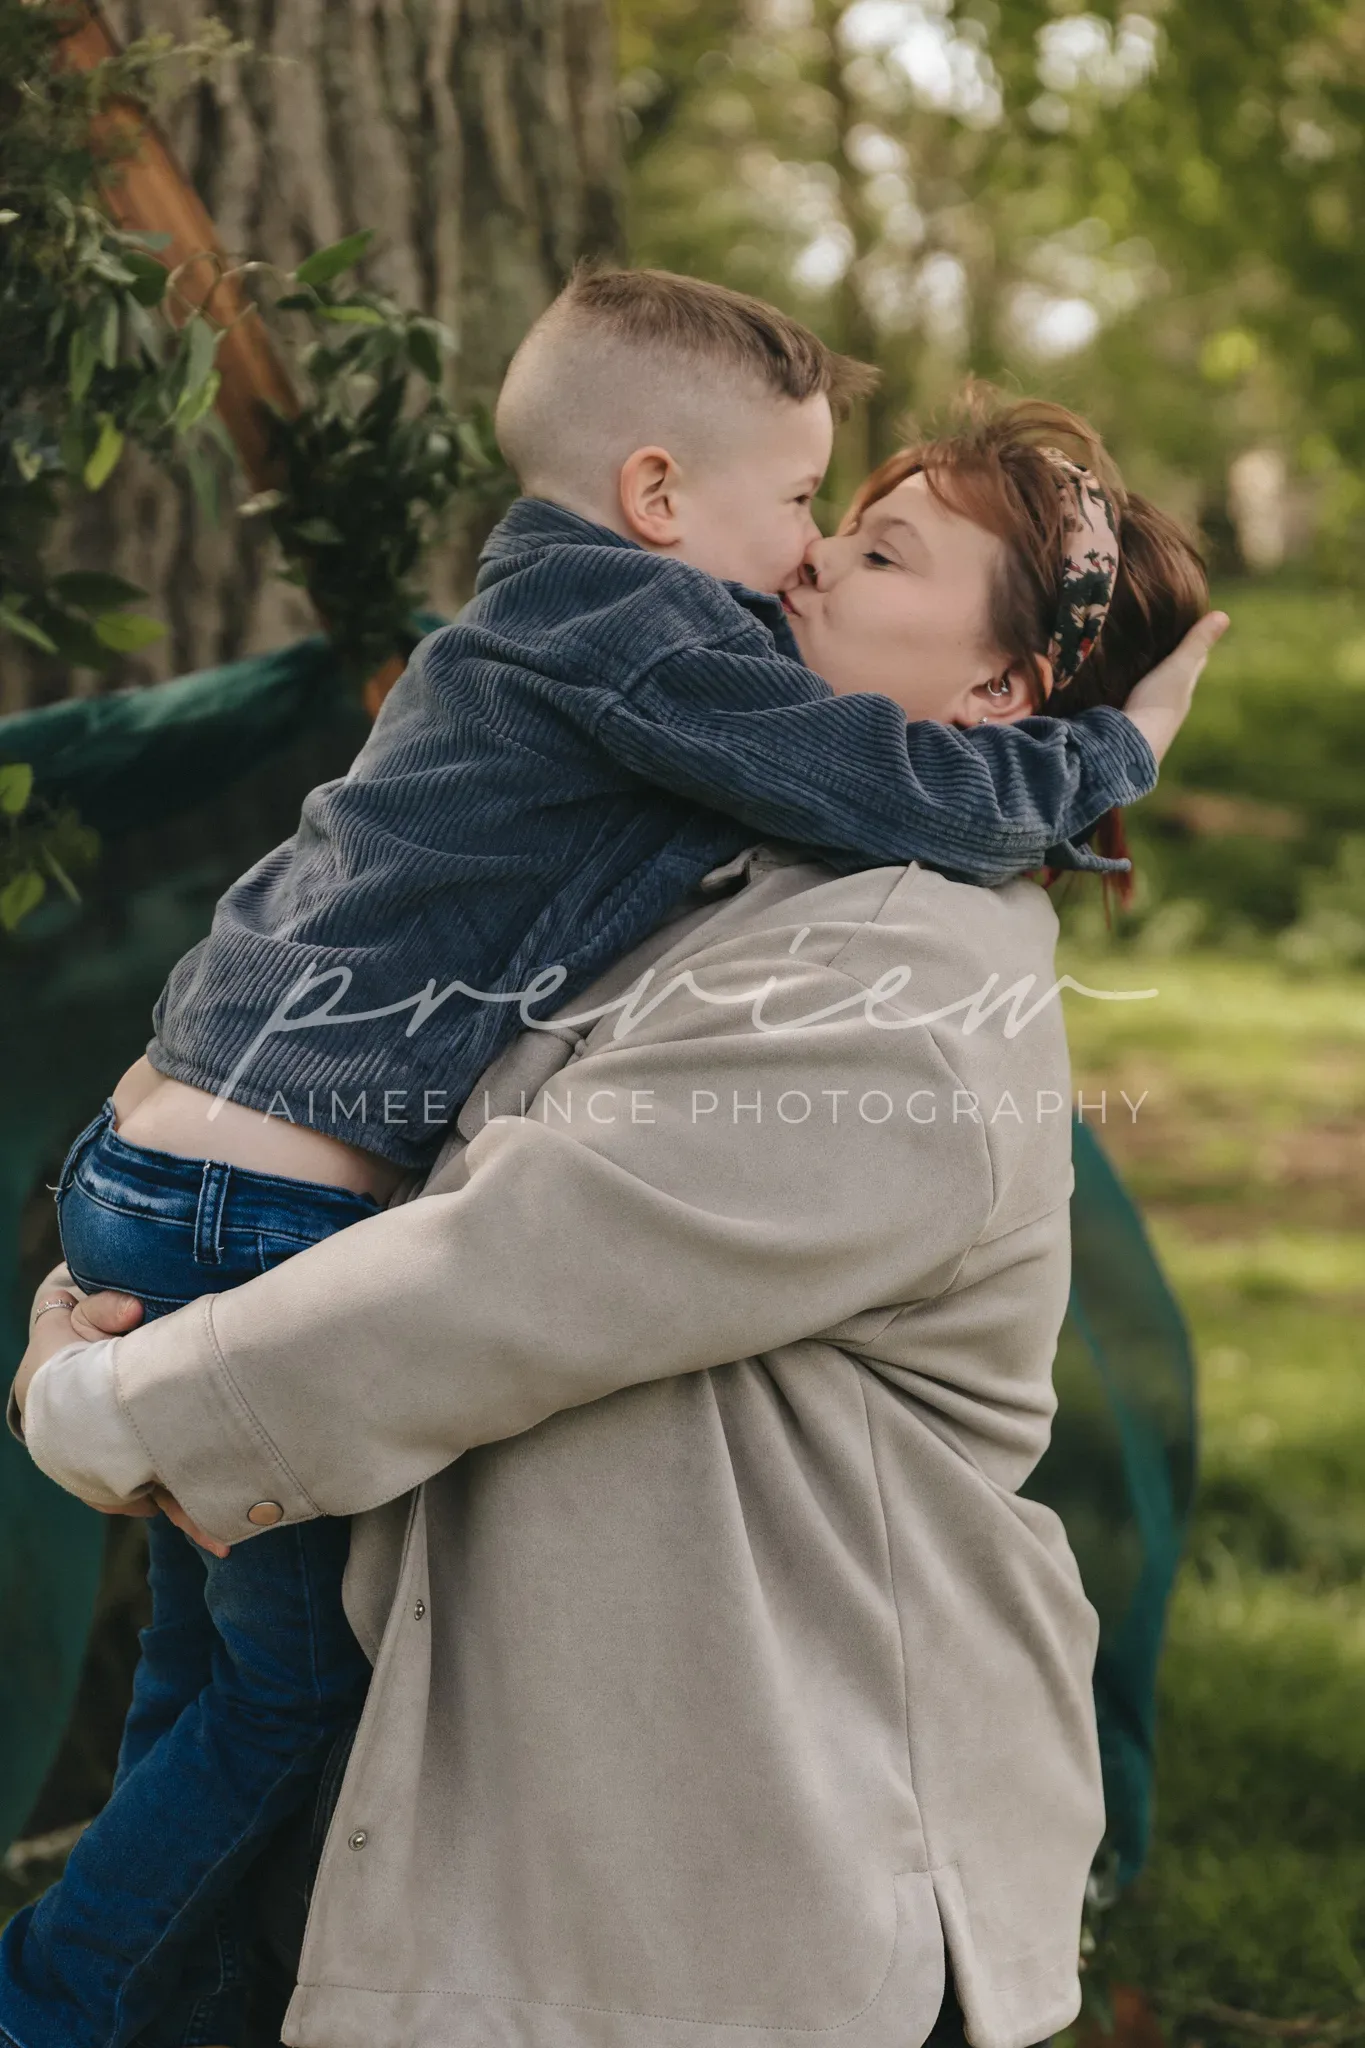 A young woman named Gabrielle, carrying a small boy in her arms, sharing a kiss on the lips in a lush park. Gabrielle's right arm encircles the boy's back, both showing